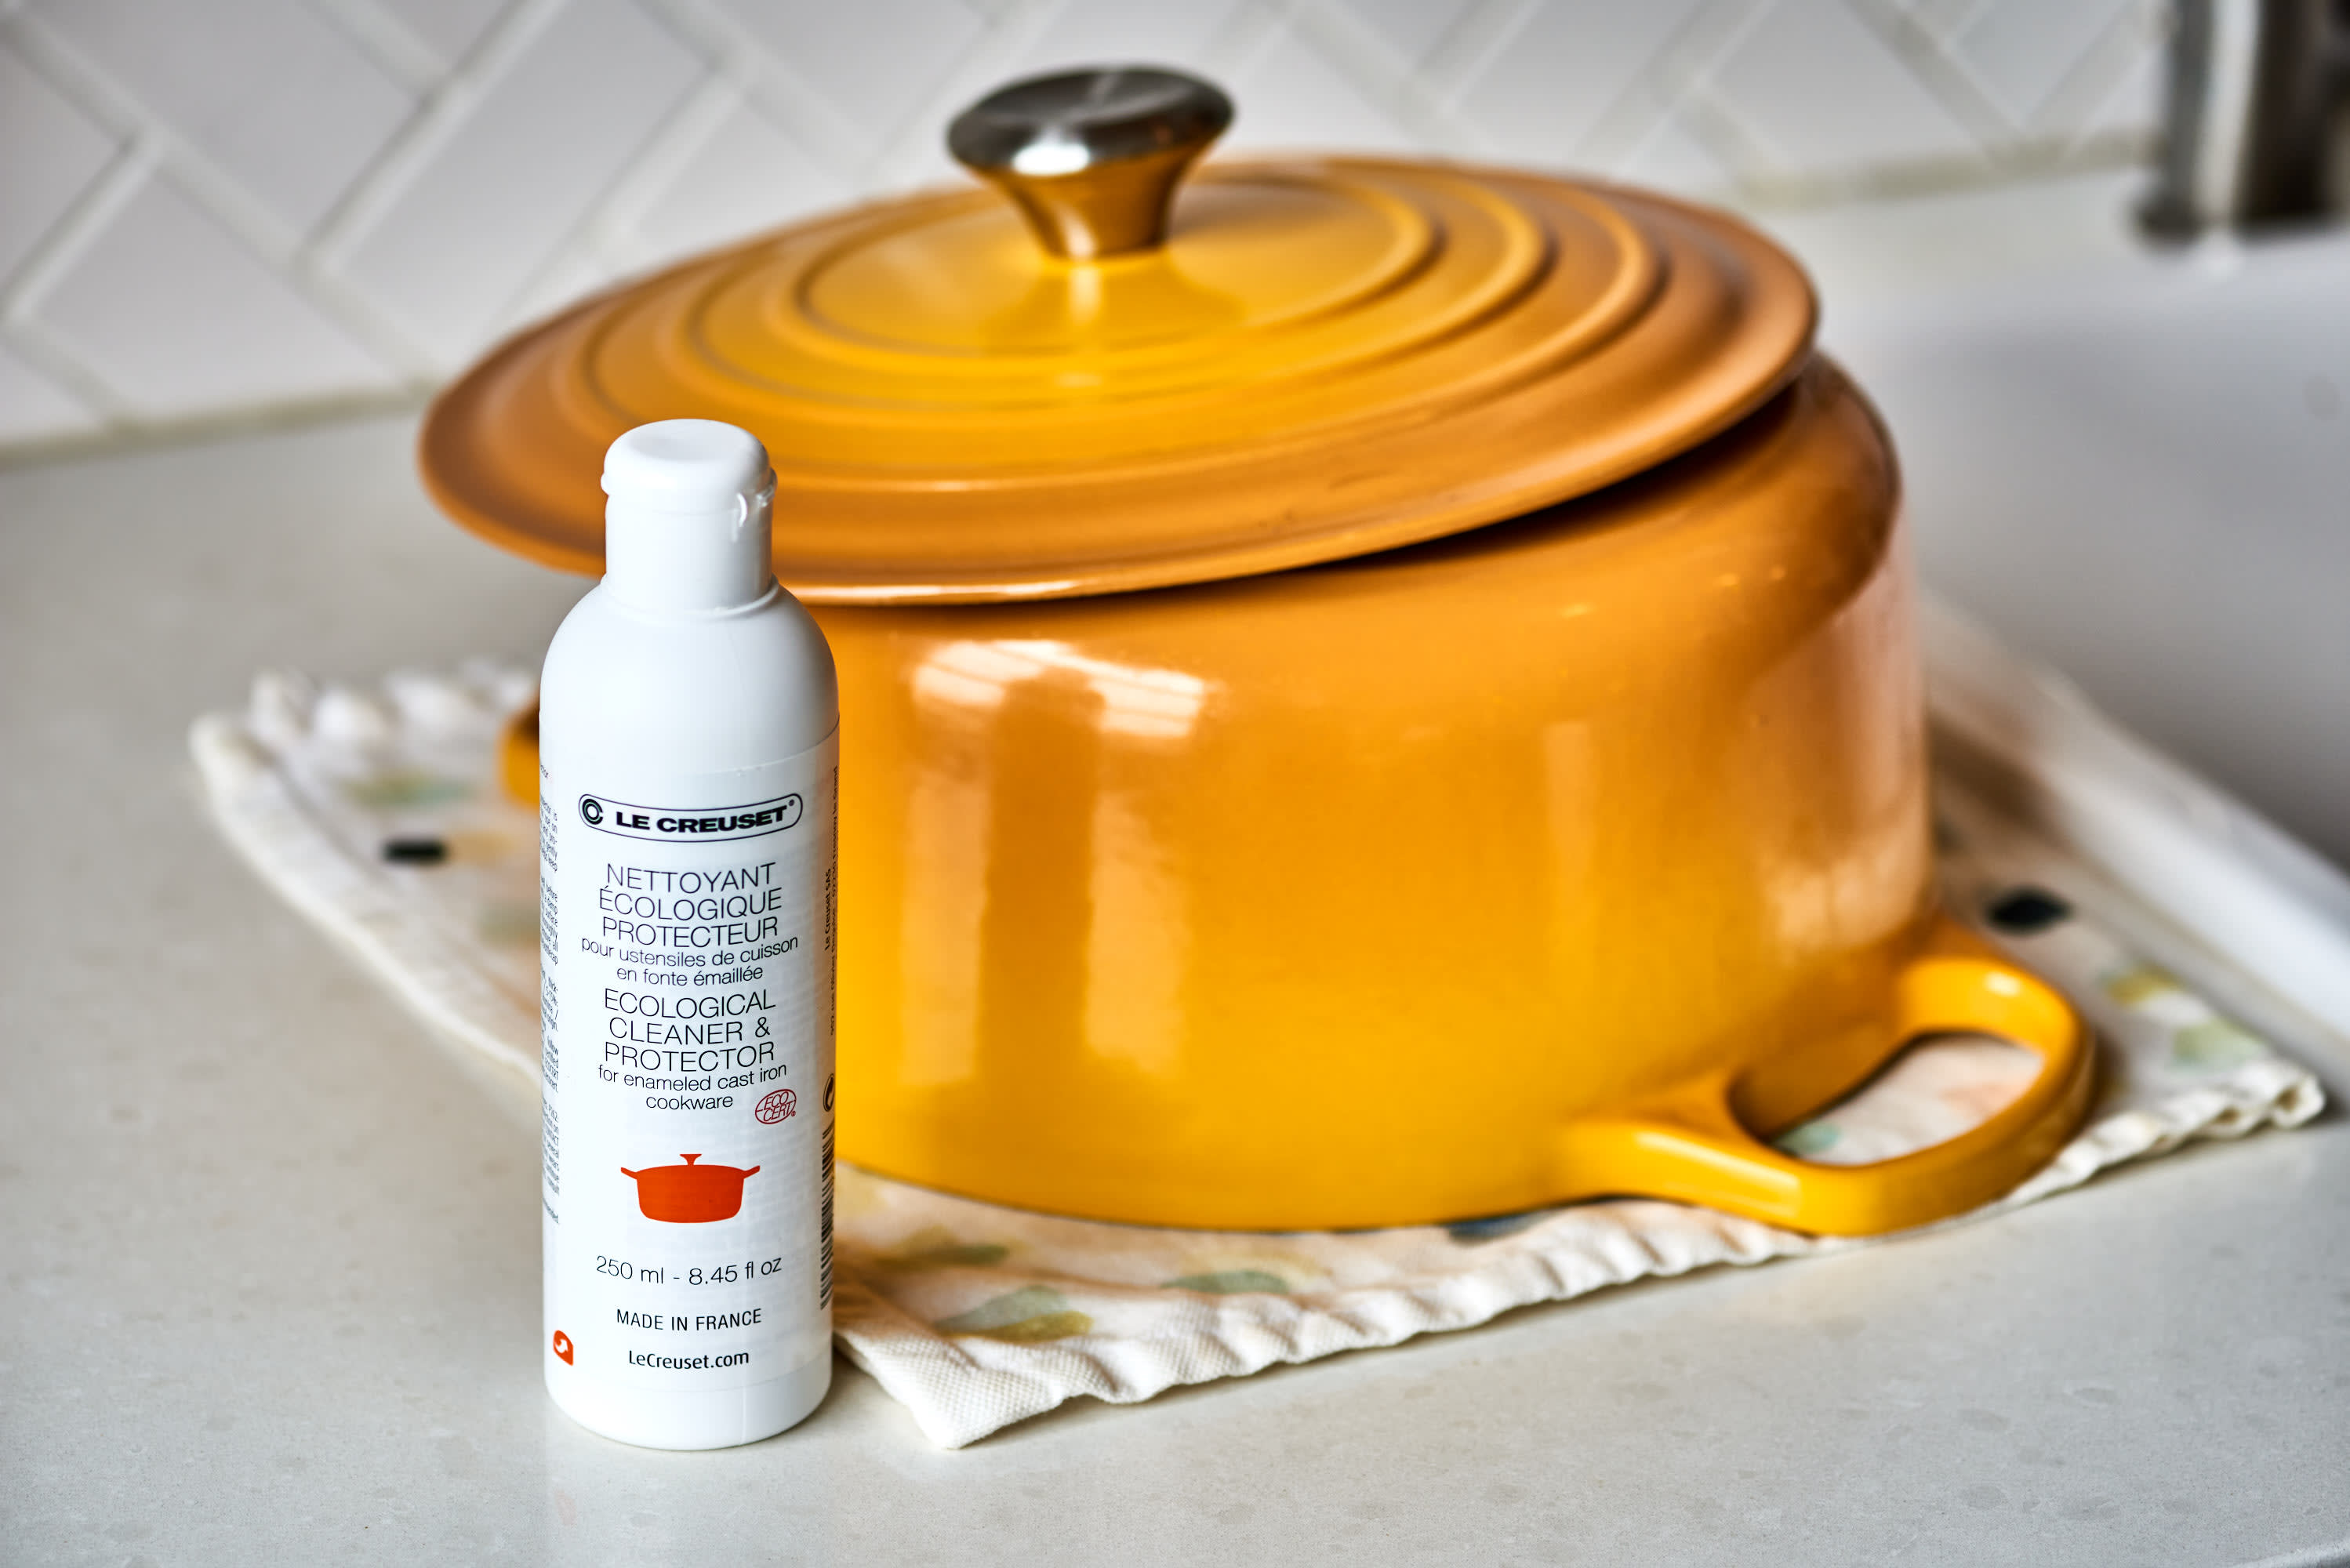 Le Creuset Enameled Cast Iron Cookware Cleaner